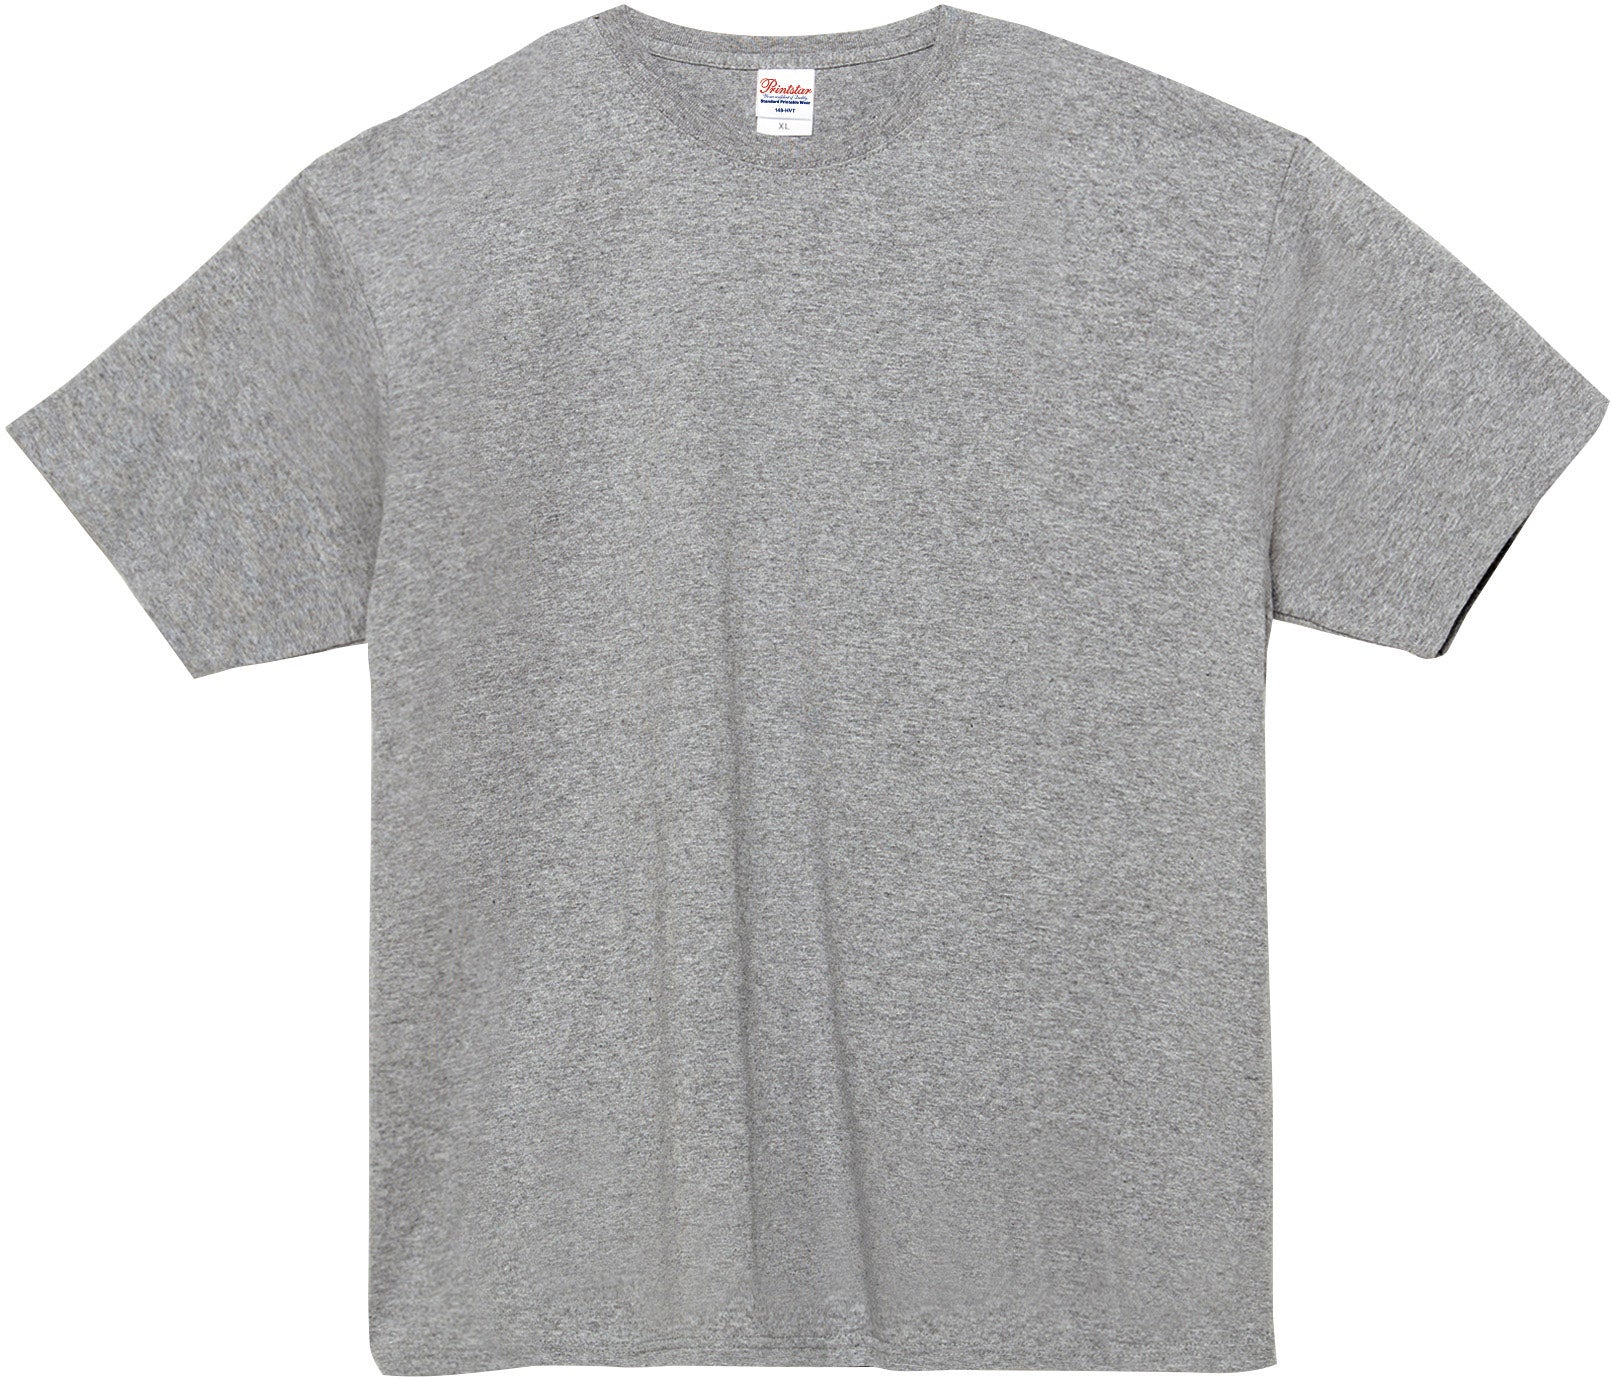 [*00148-HVT] 7.4 Apparel Weight – Sustainable Printstar Super oz Heavy T-shirts Corporate and Merchandise